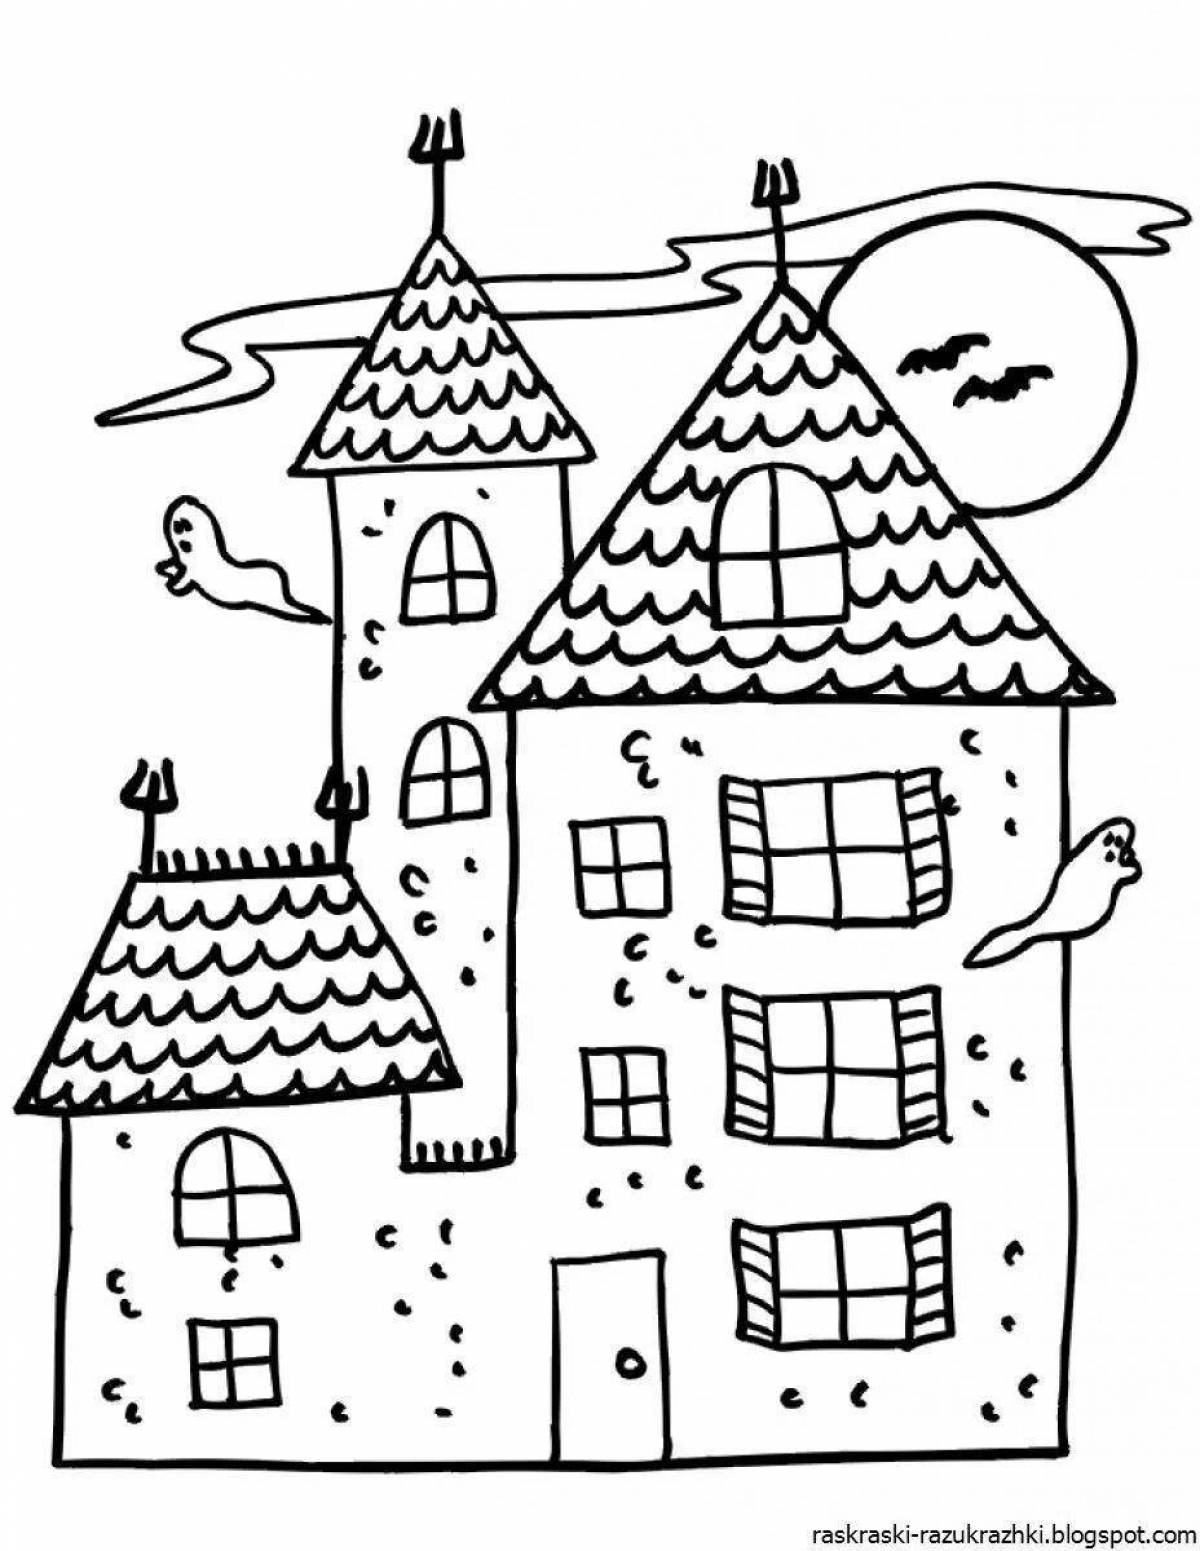 Colouring bright houses for children 4-5 years old